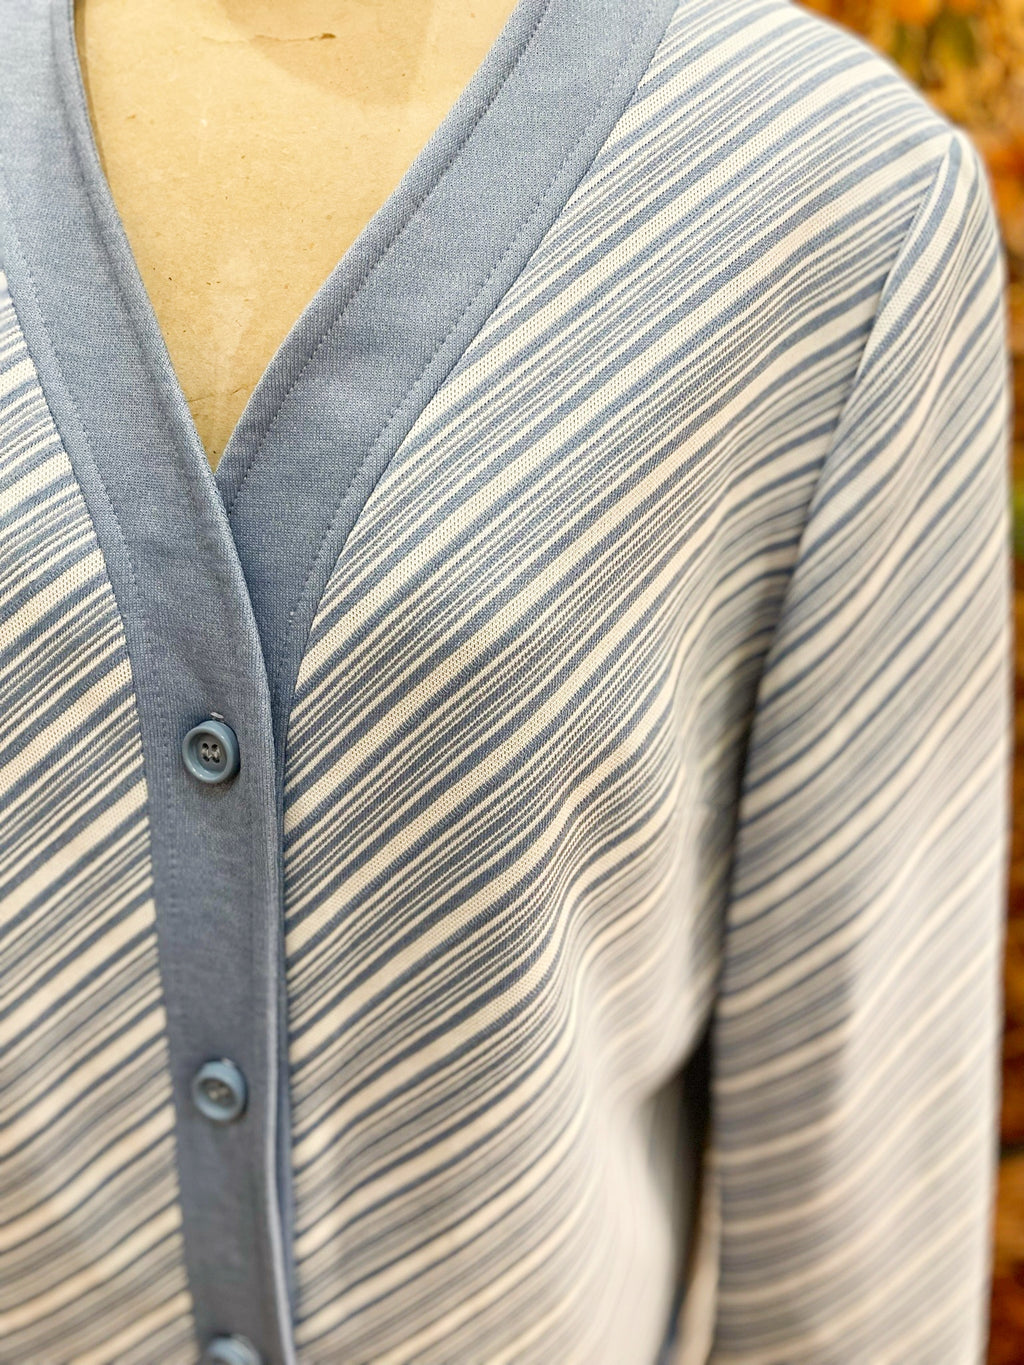 1970s Blue Candy Cane Striped Cardigan